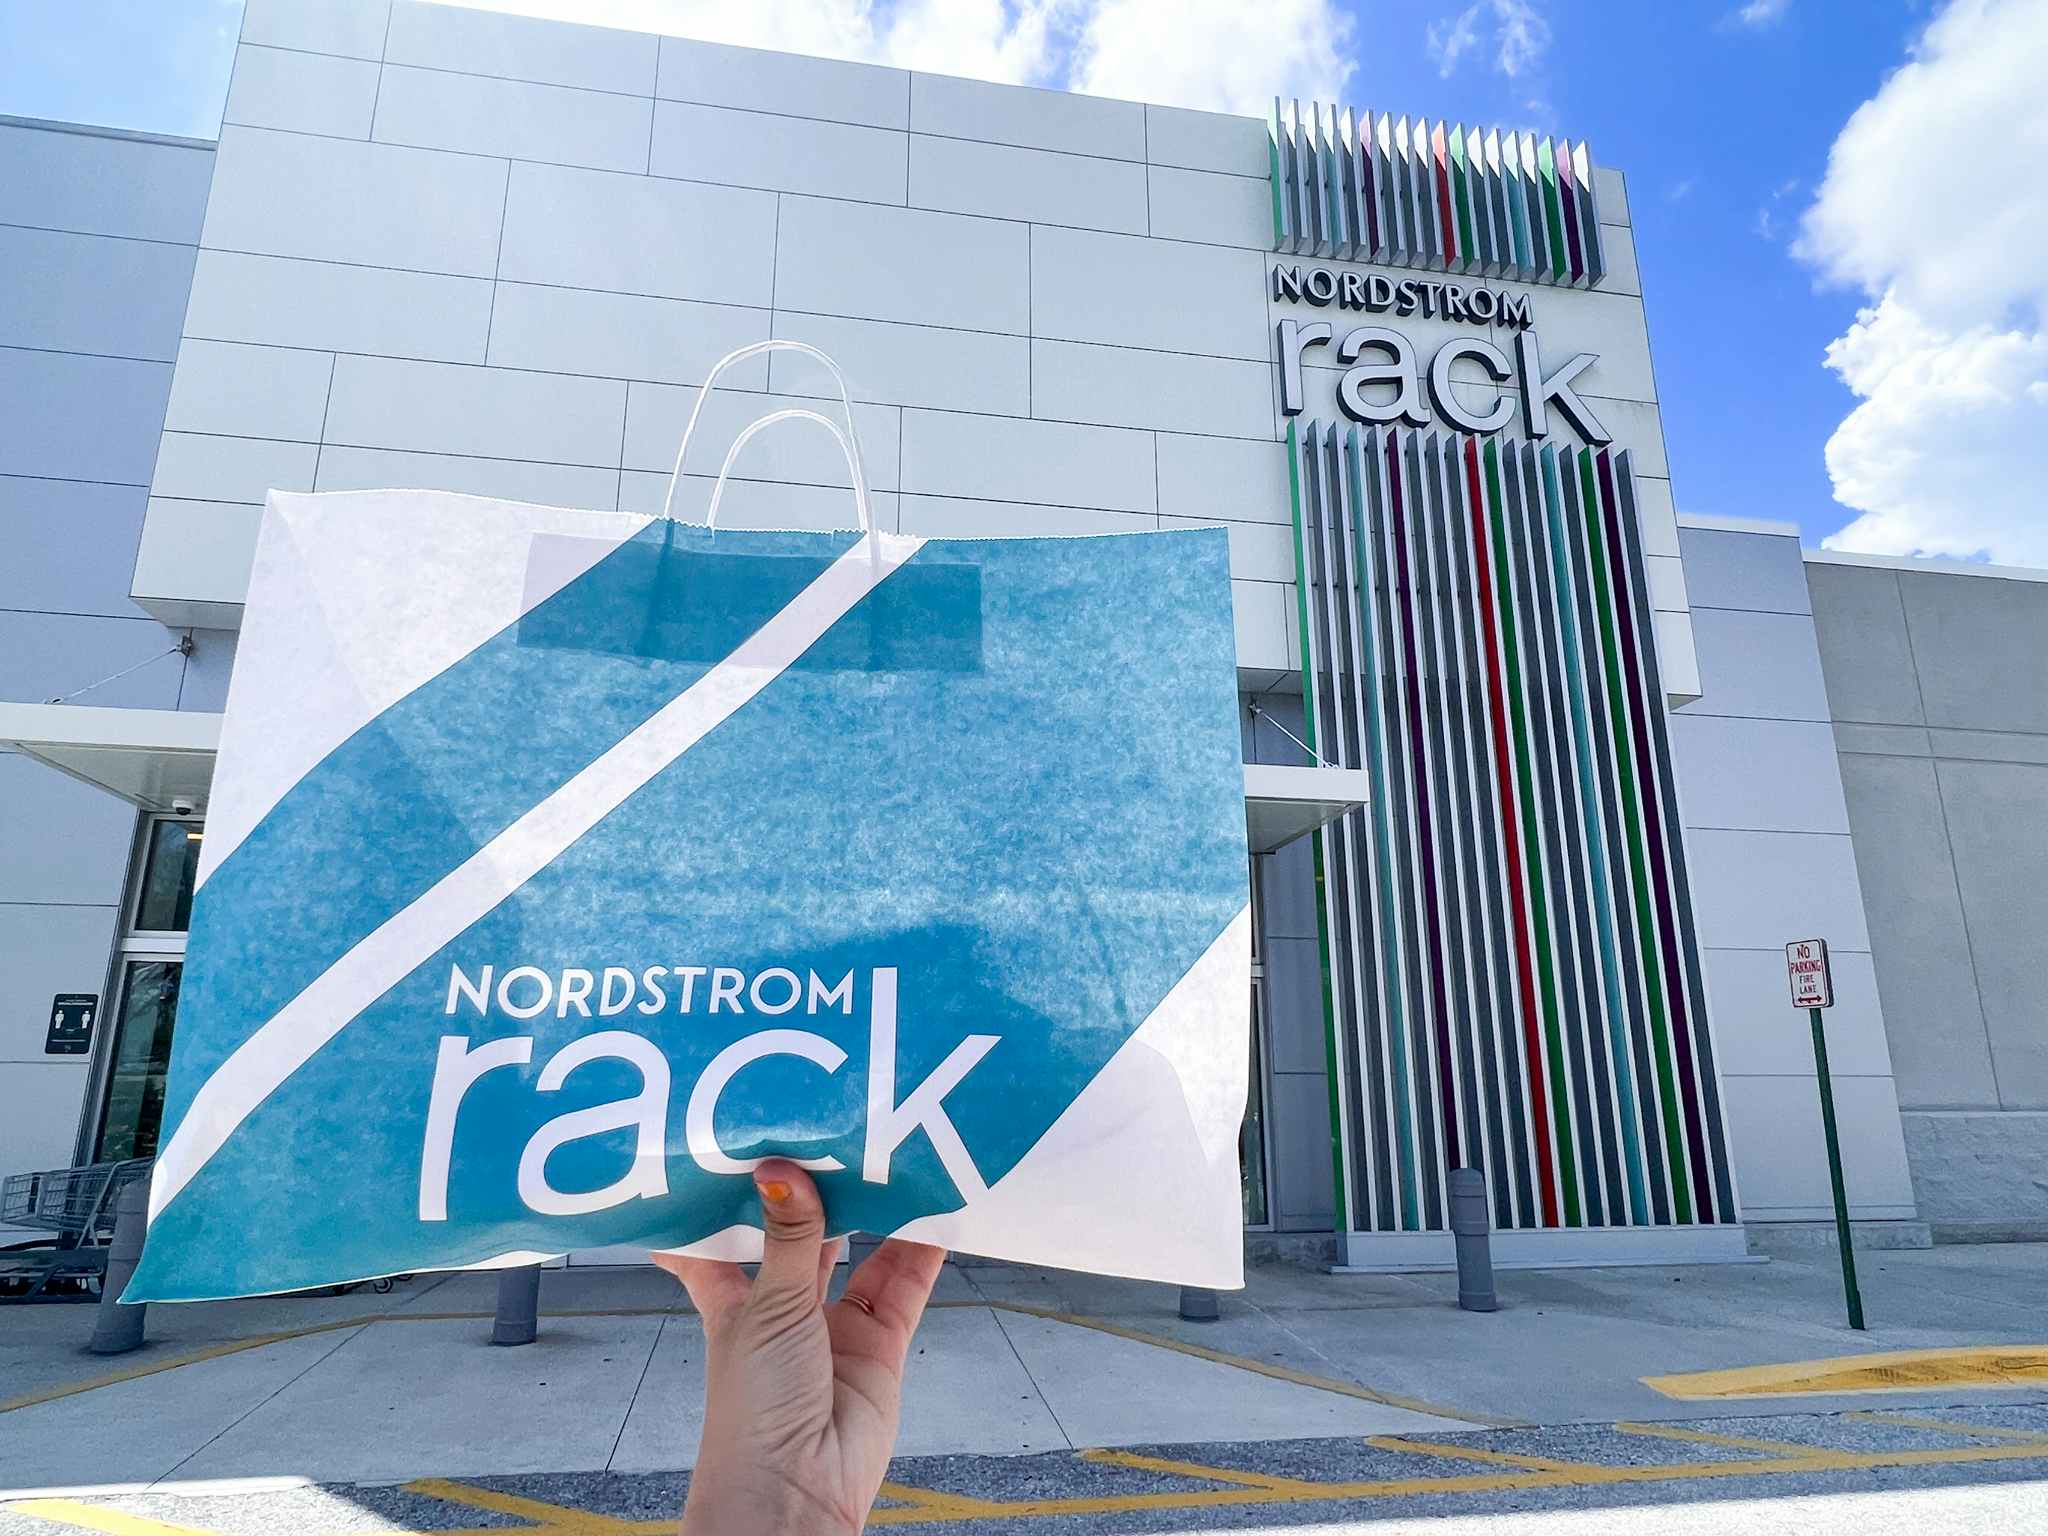 Nordstrom Rack Reopening with Weeklong 40% Off Sale - The Krazy Coupon Lady